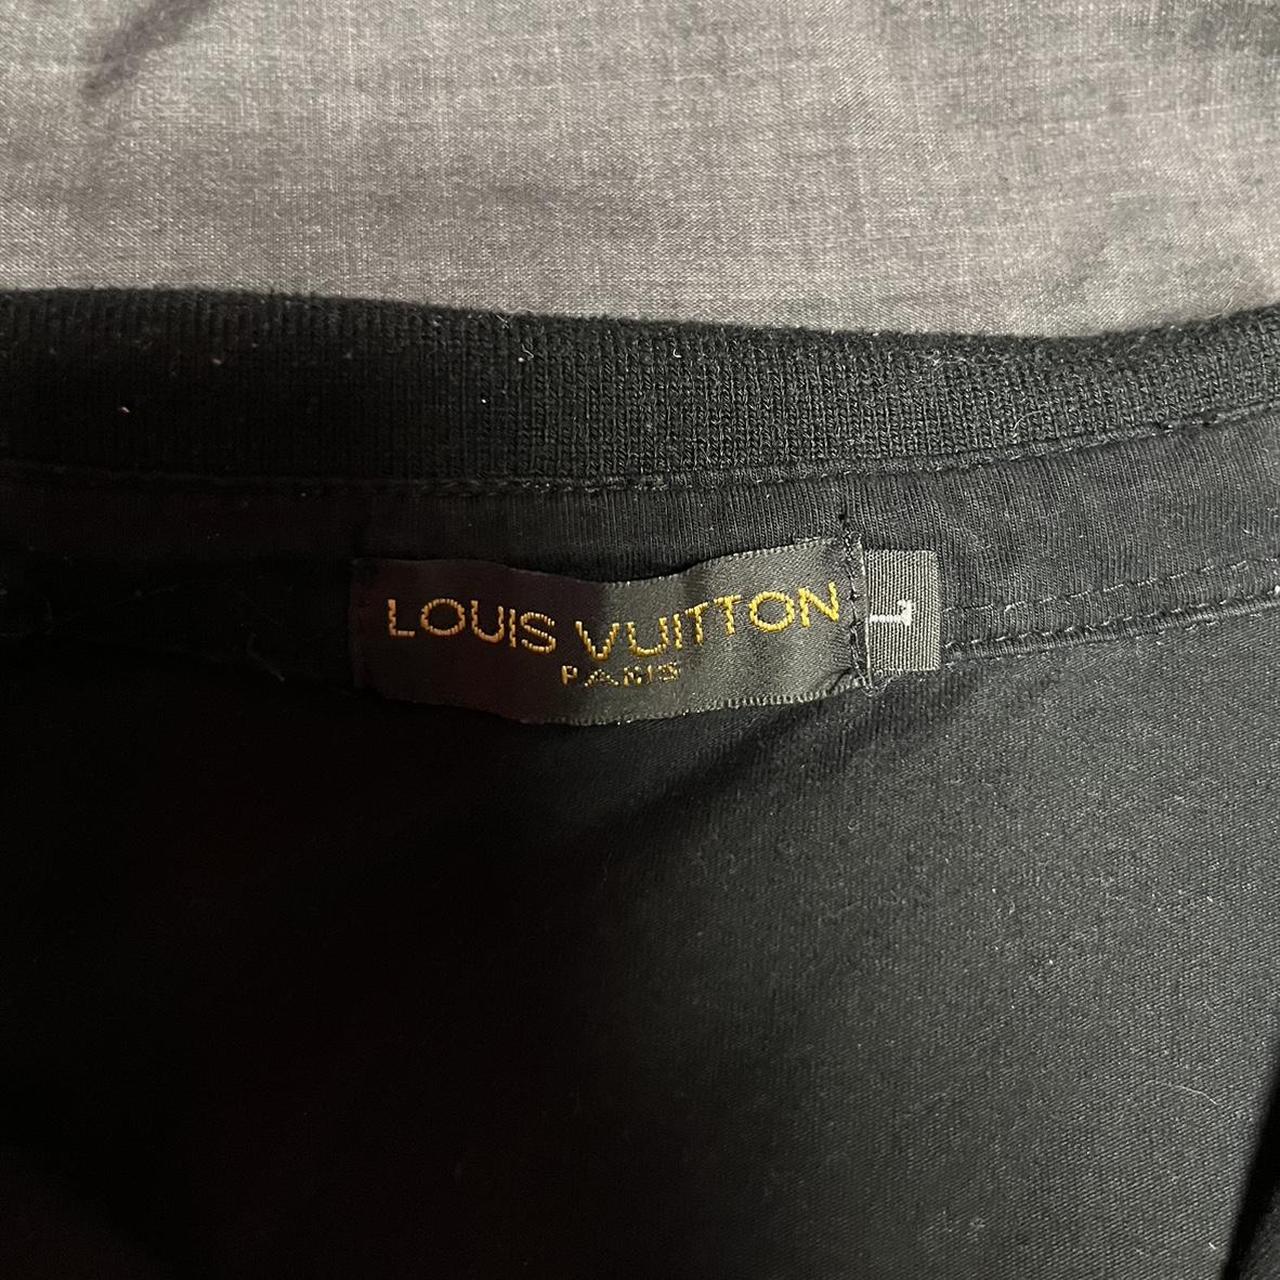 Louis Vuitton collared black and brown checkered - Depop